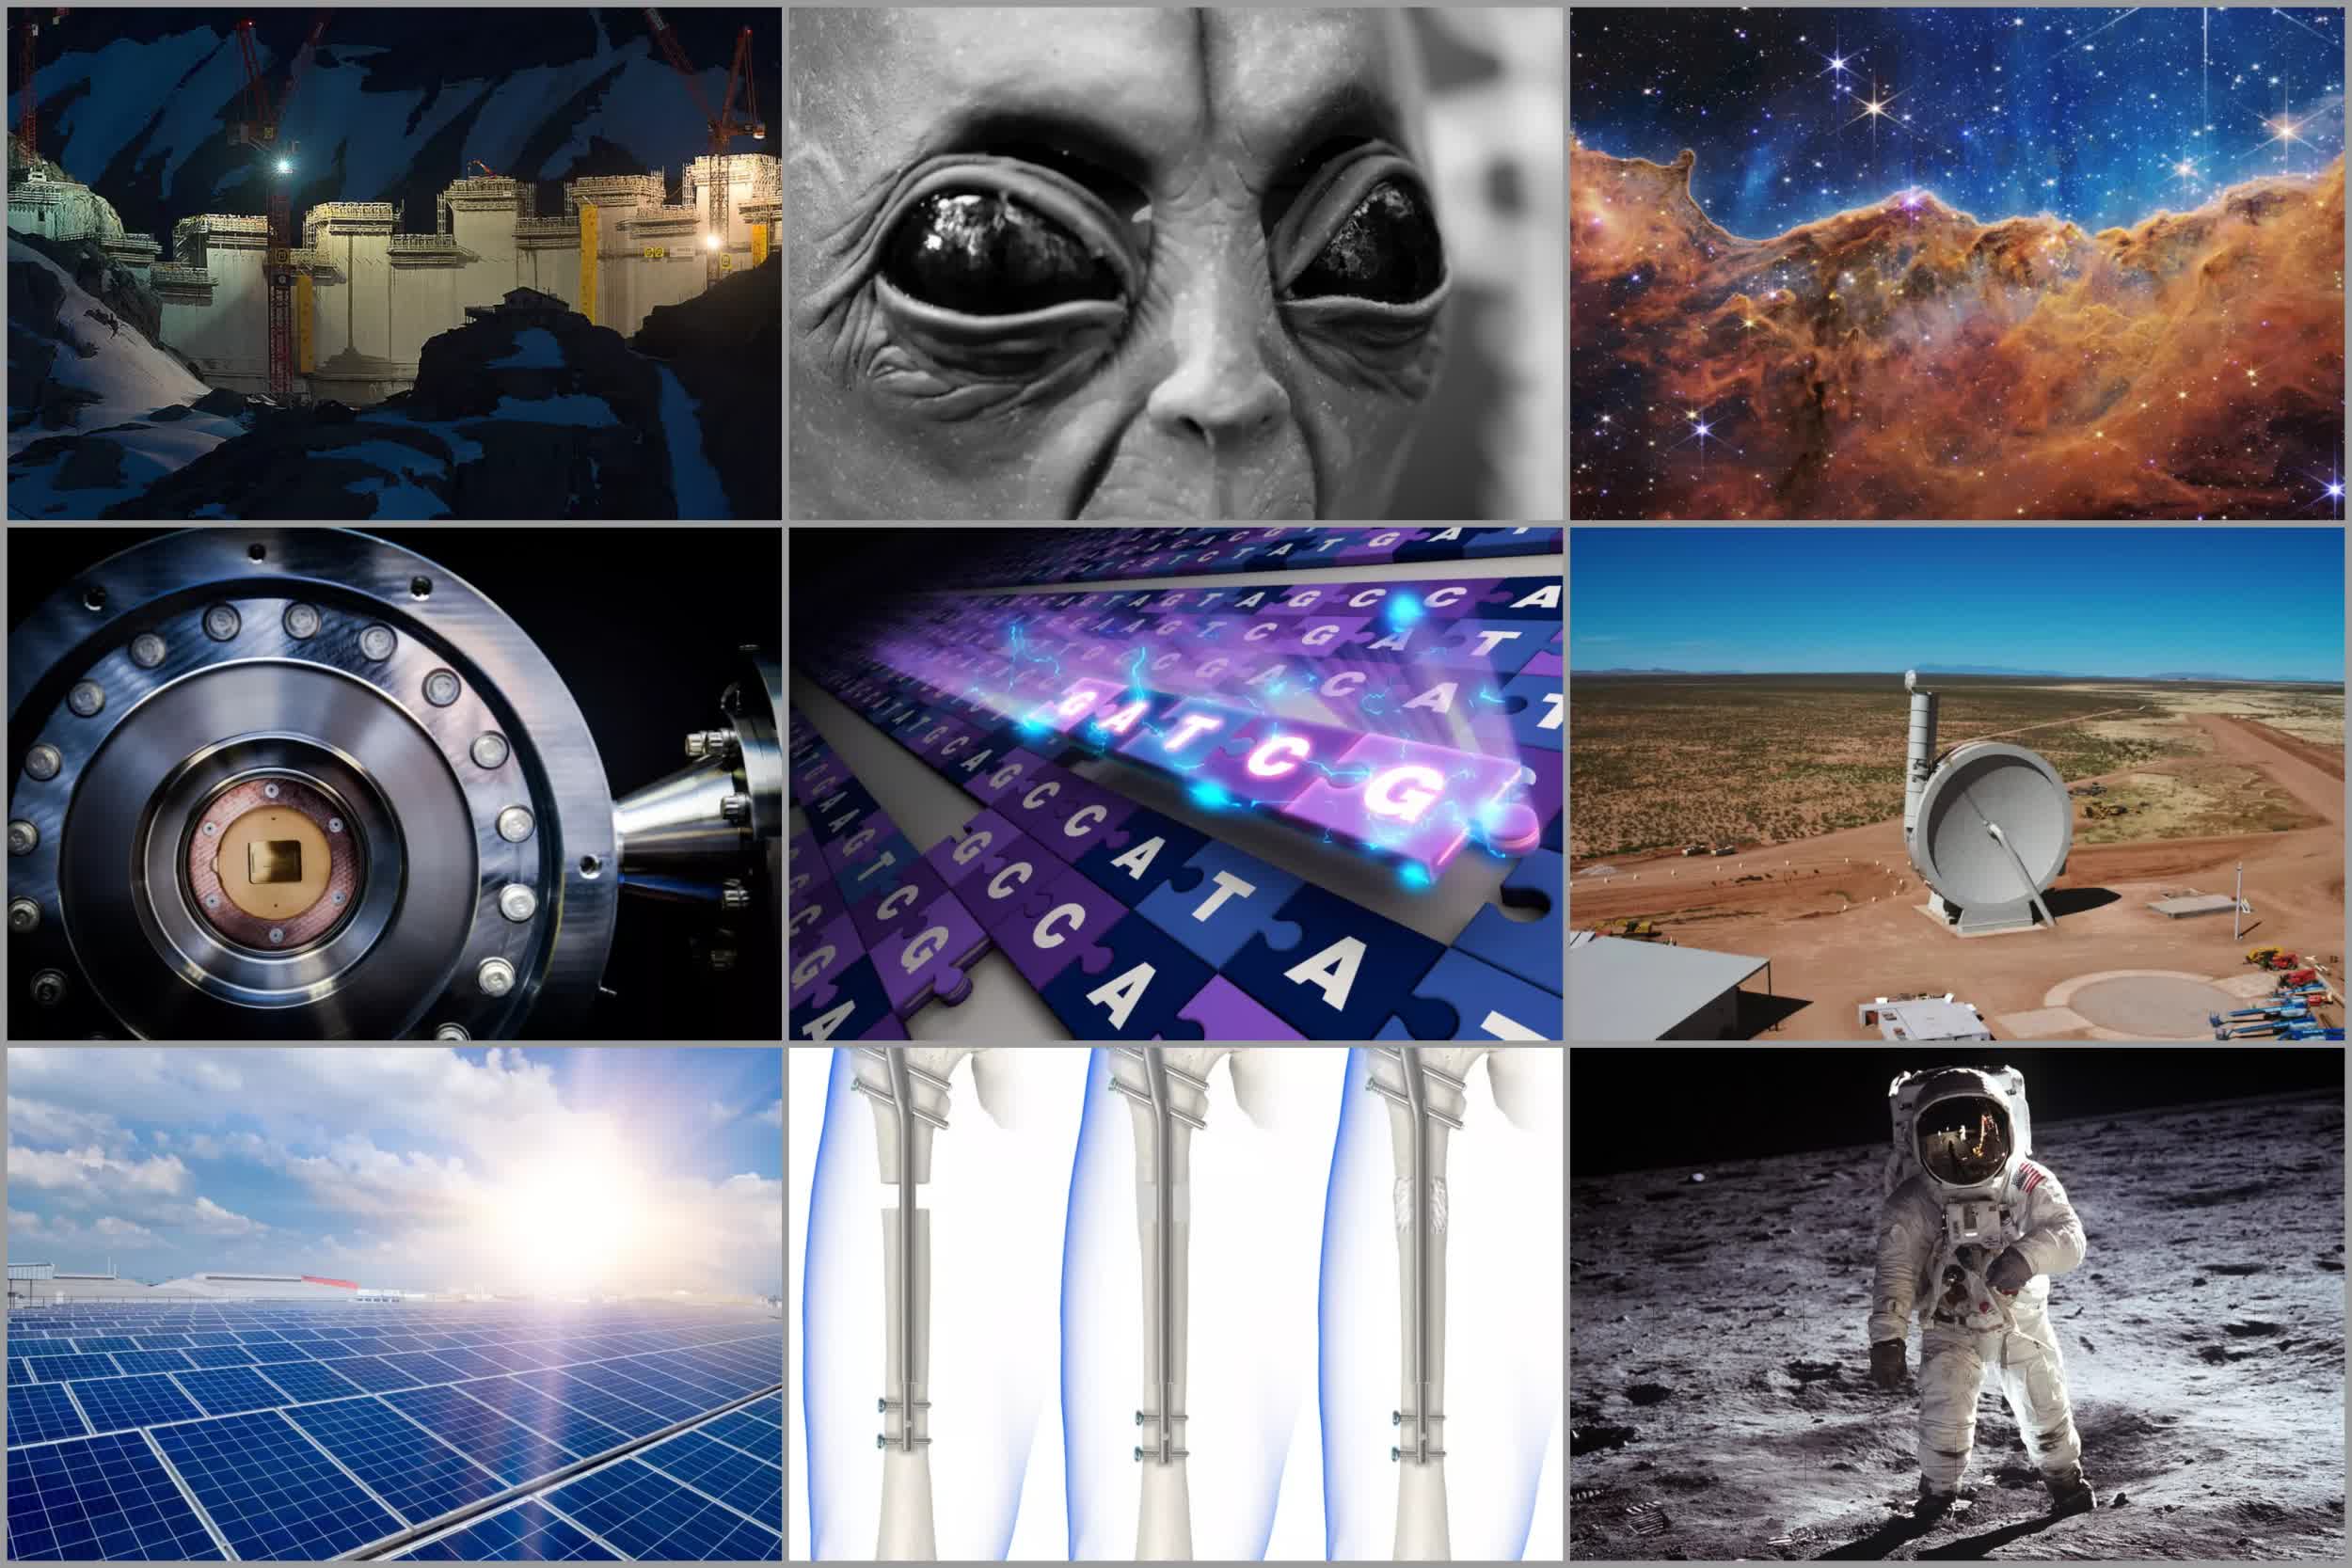 TechSpot's top science stories of 2022: Space, the final frontier